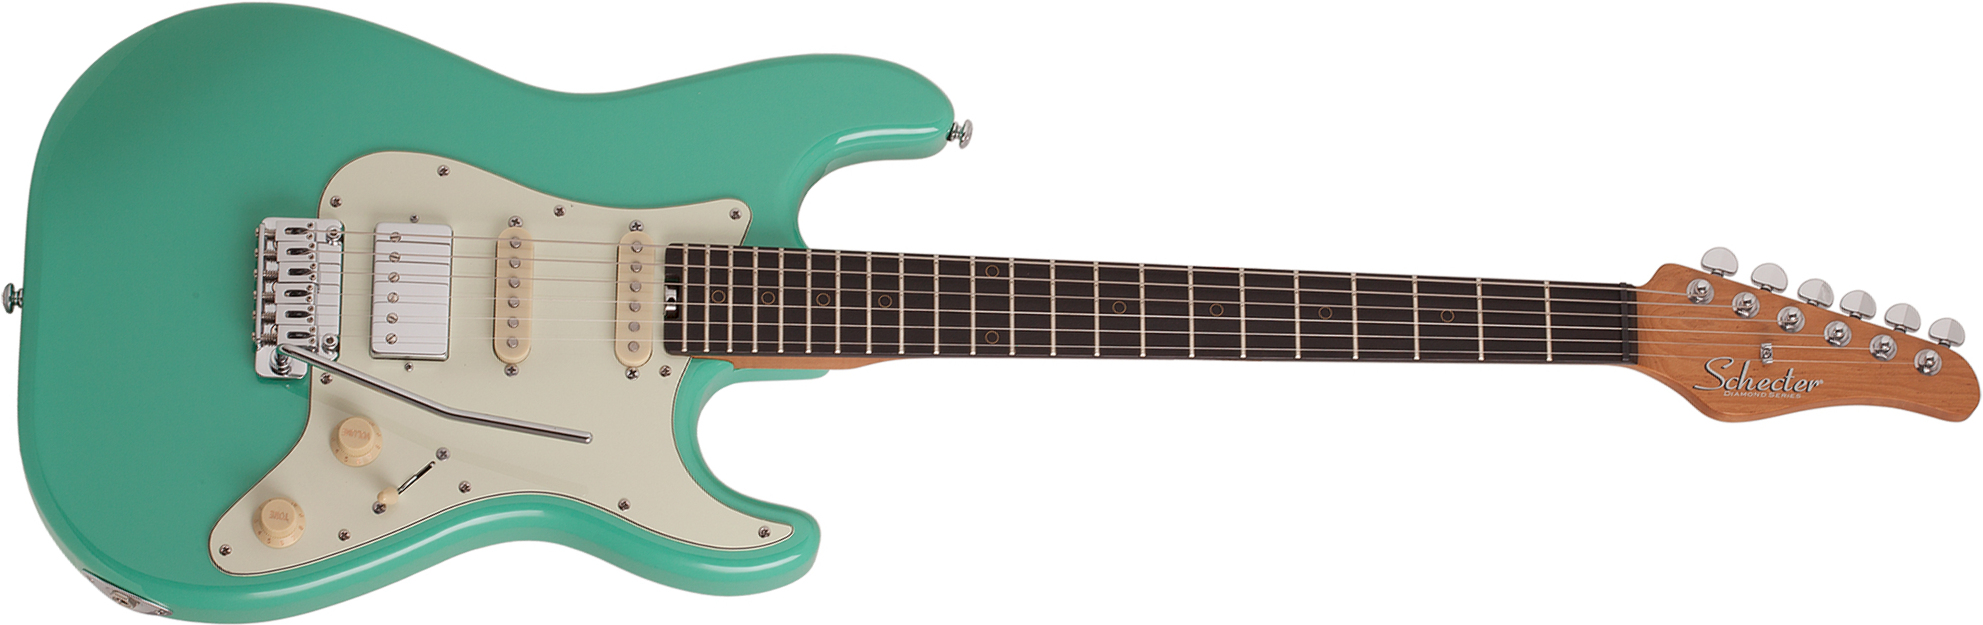 Schecter Nick Johnston Traditional Hss Signature Trem Eb - Atomic Green - Str shape electric guitar - Main picture